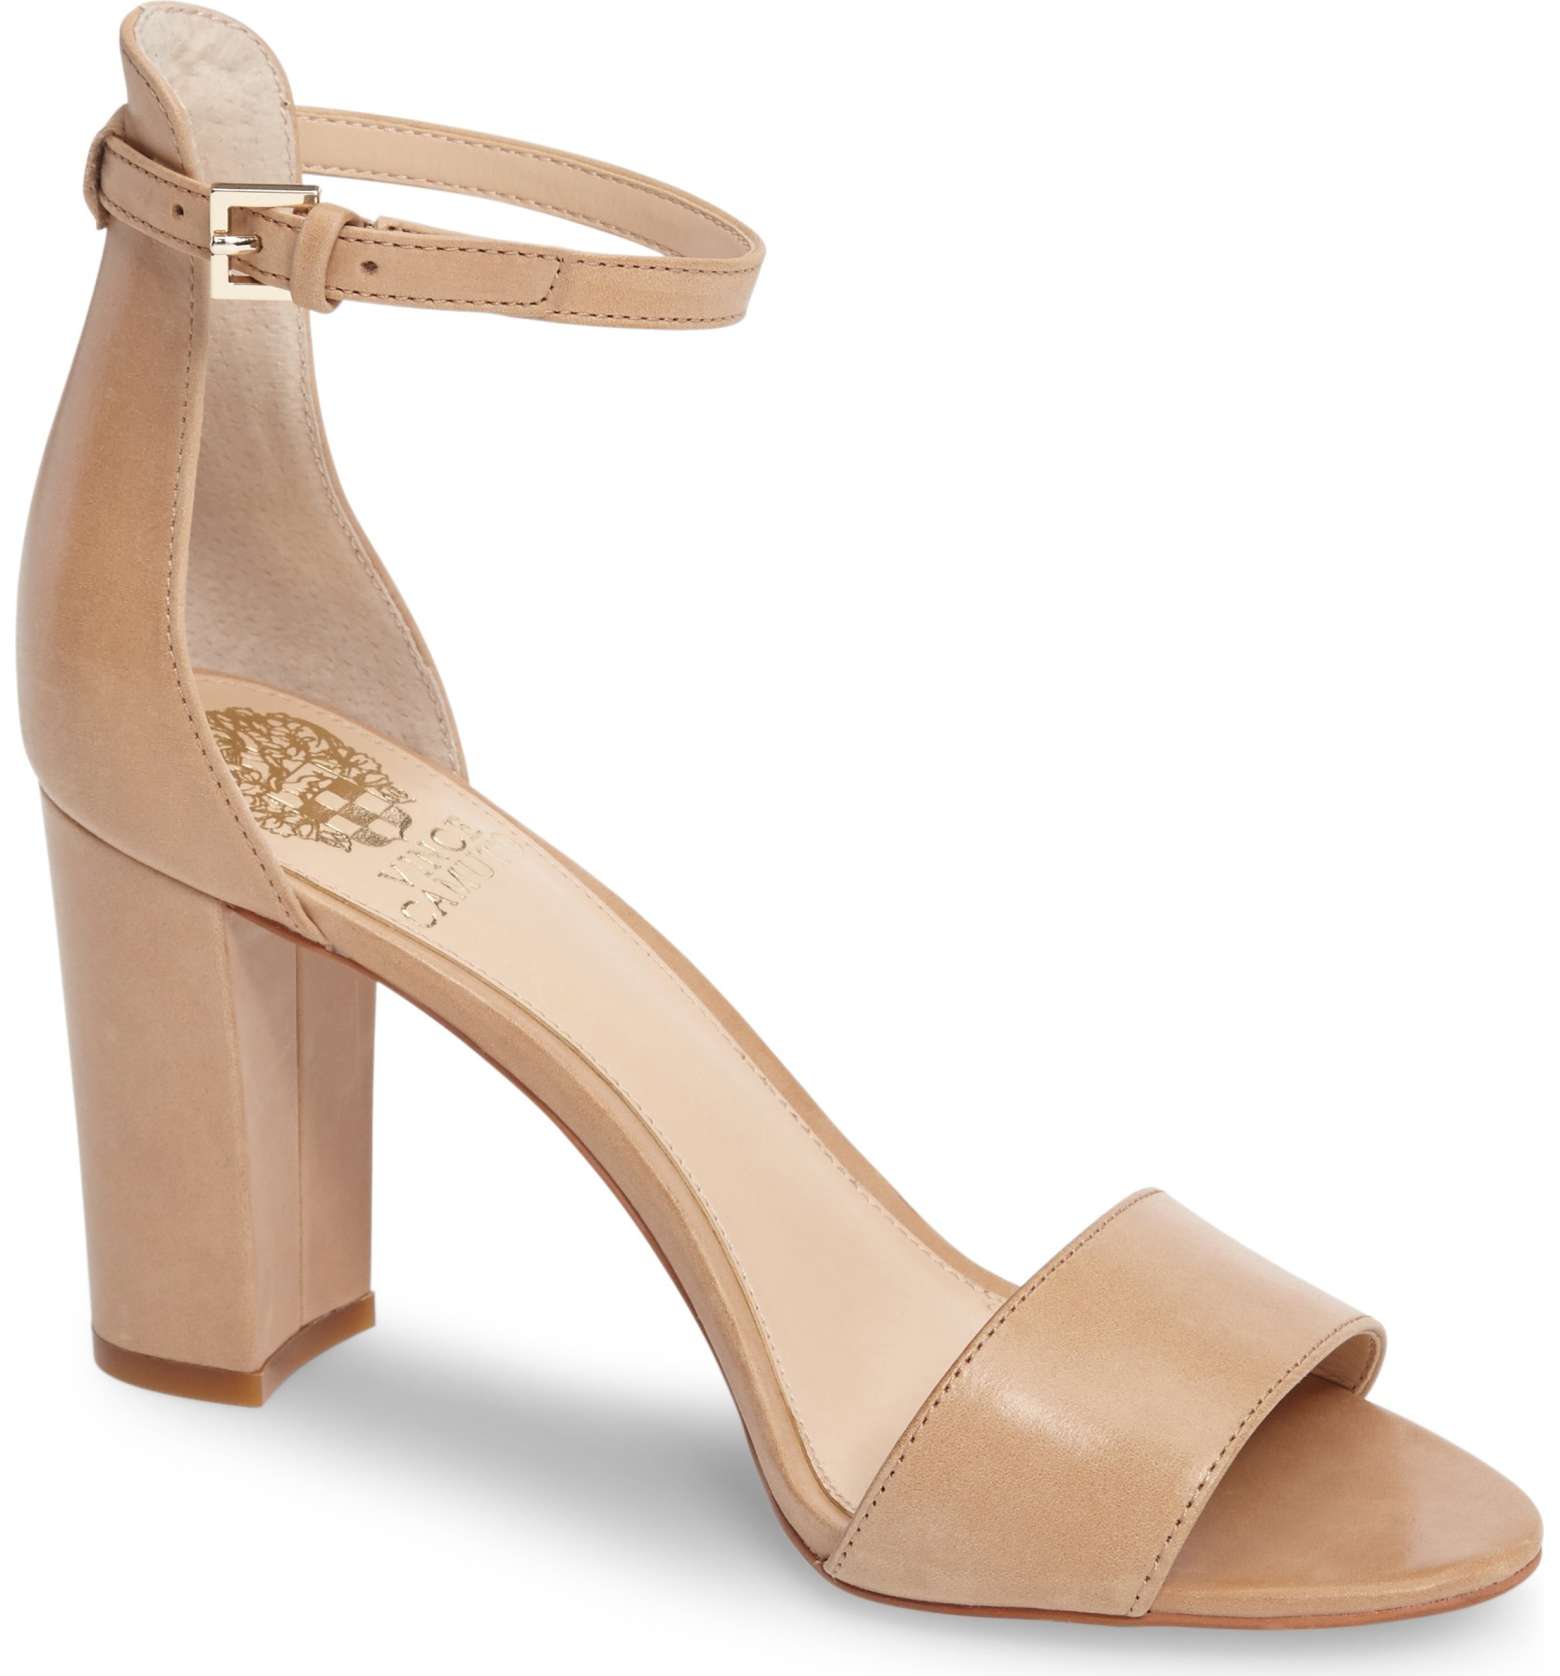 Vince Camuto Ankle Strap Sandals